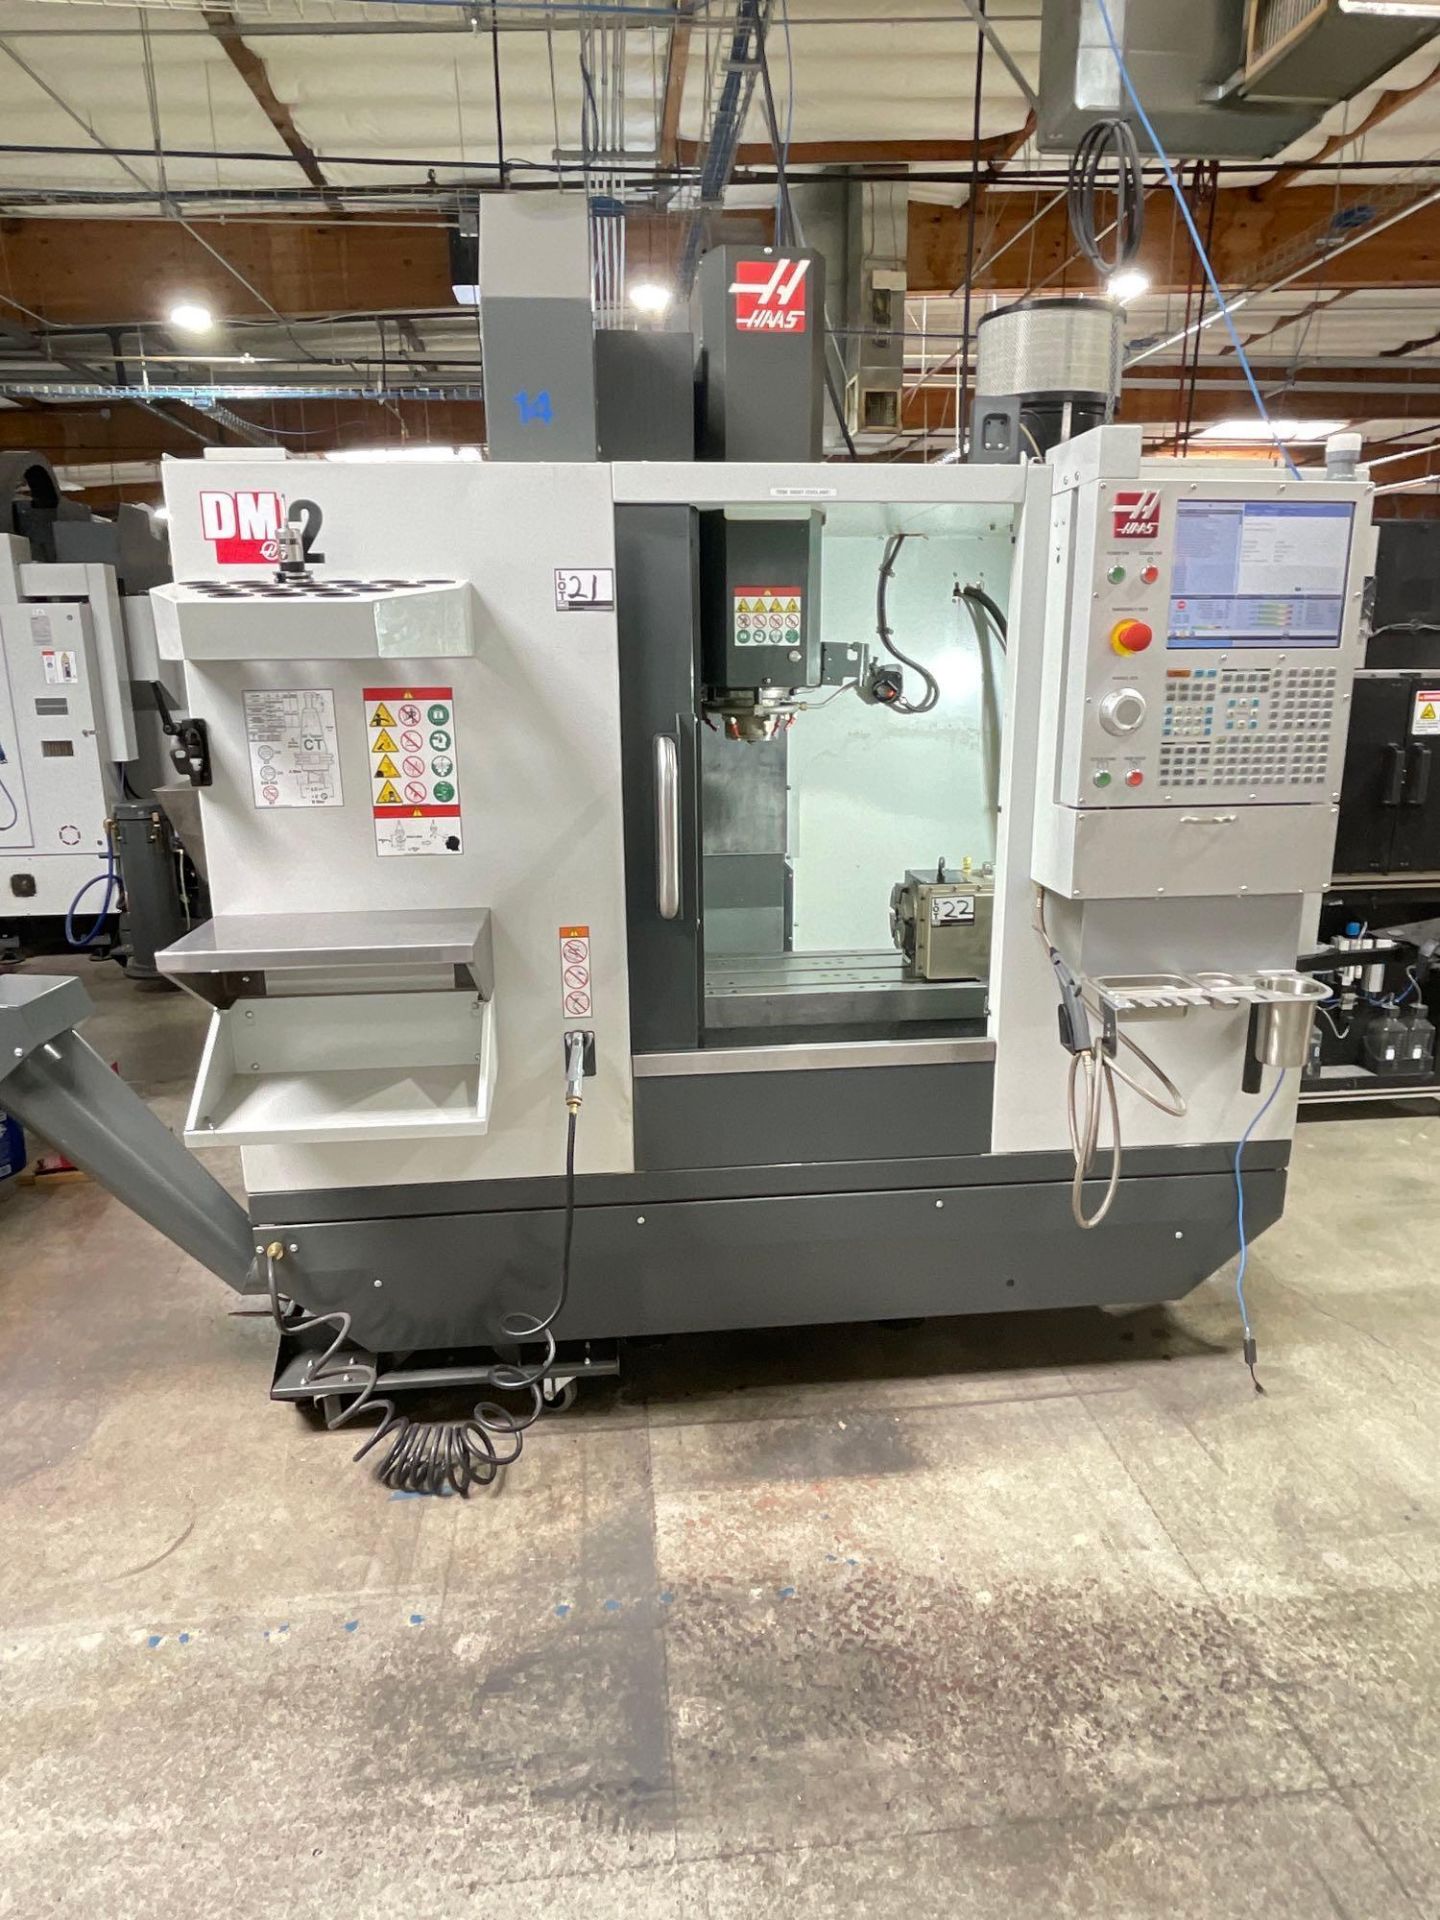 Haas DM-2, 28” x 16” x 15.5” Travels, CT 40, 18+1 SMTC, CTS, WIPS, as New as 2021 - Image 6 of 14